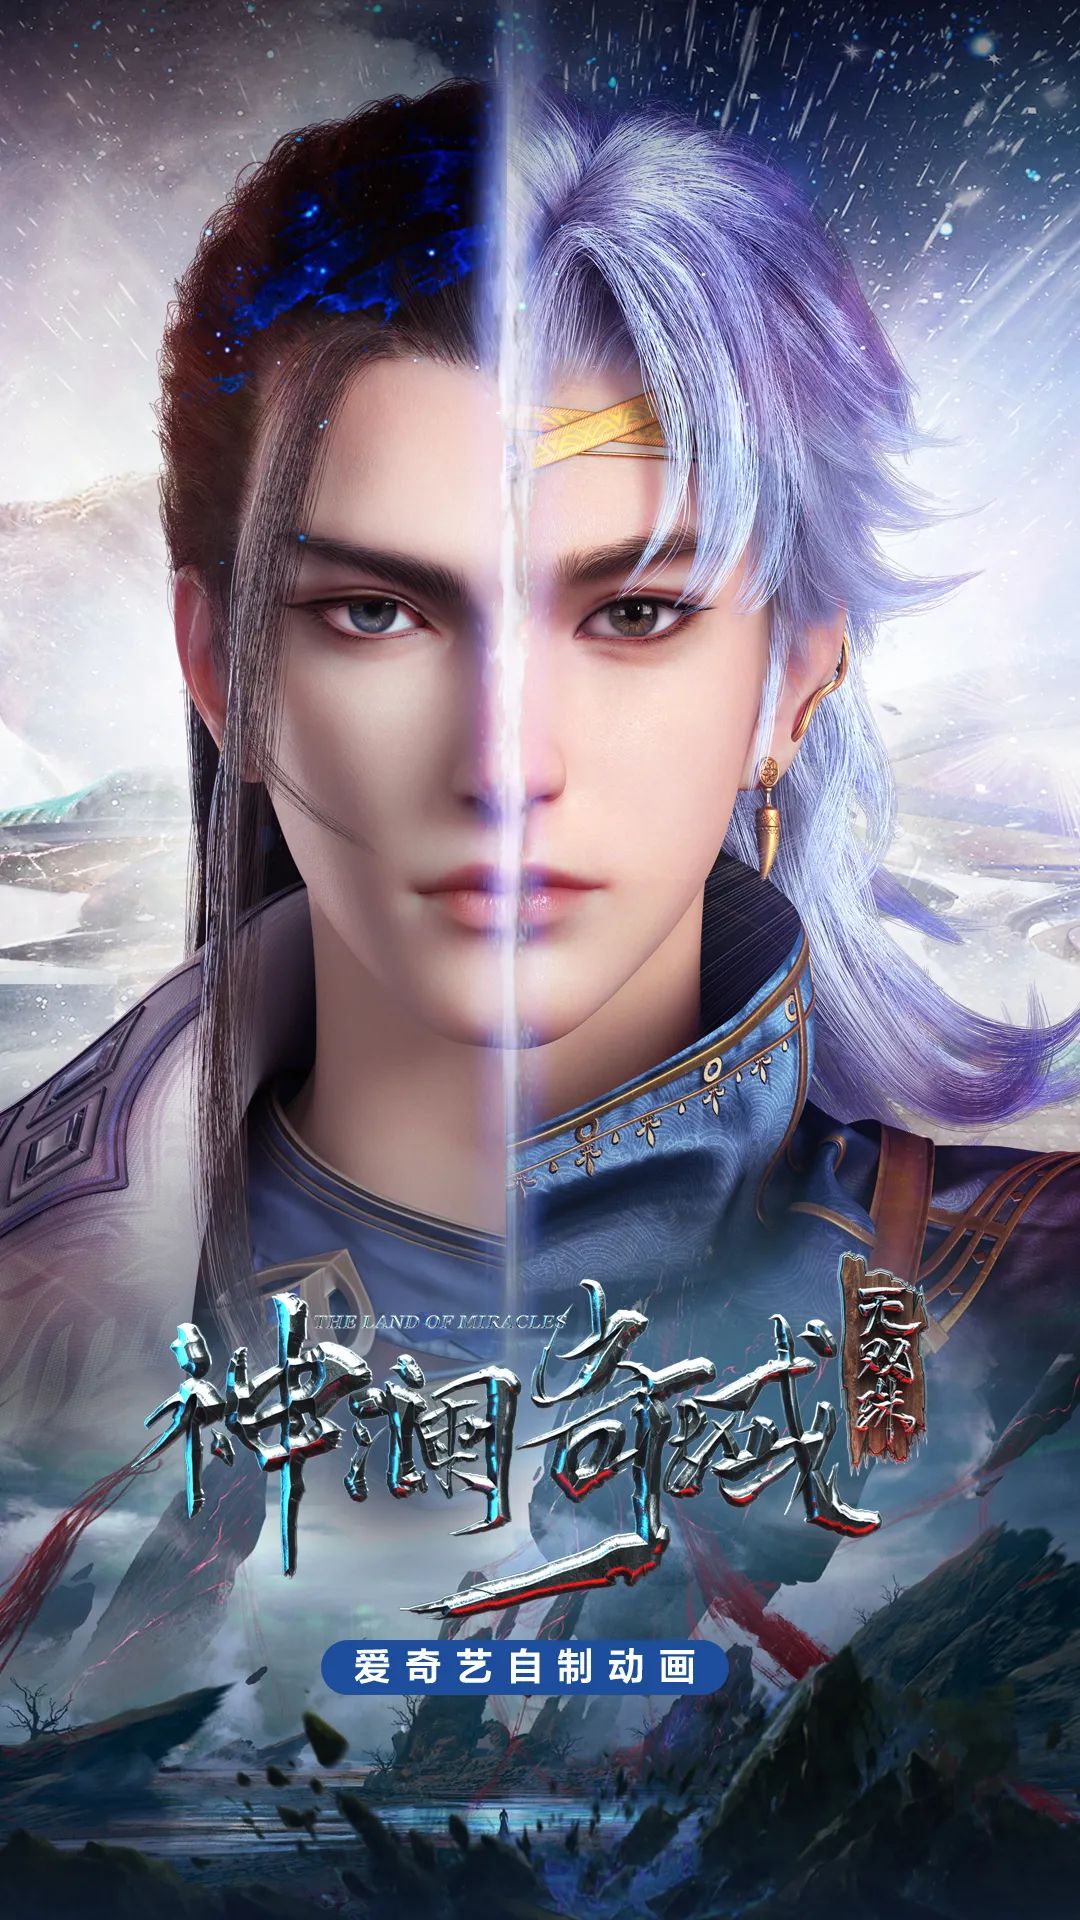 TV ratings for The Land Of Miracles (神澜奇域无双珠) in Mexico. iQiyi TV series